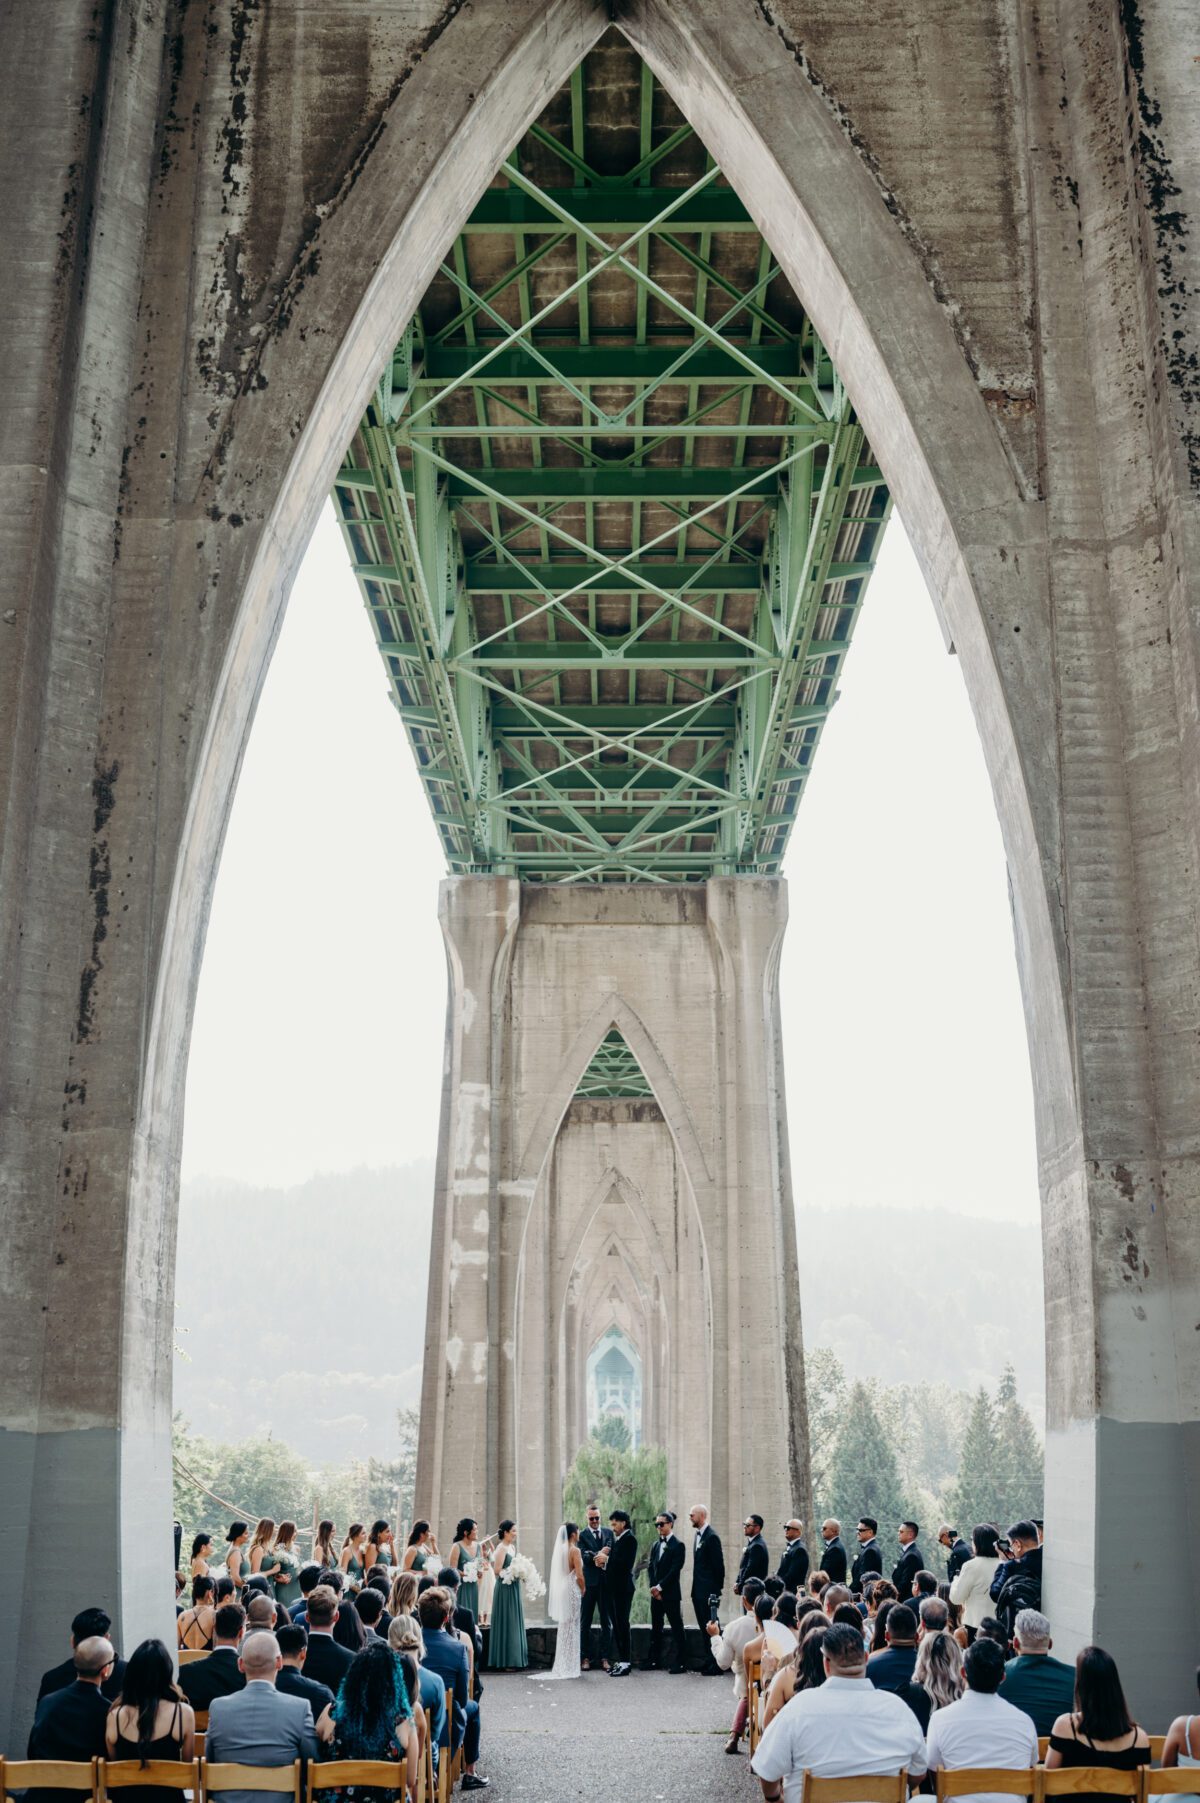 A large wedding gathering underneath the Cathedral Park / St. Johns bridge.